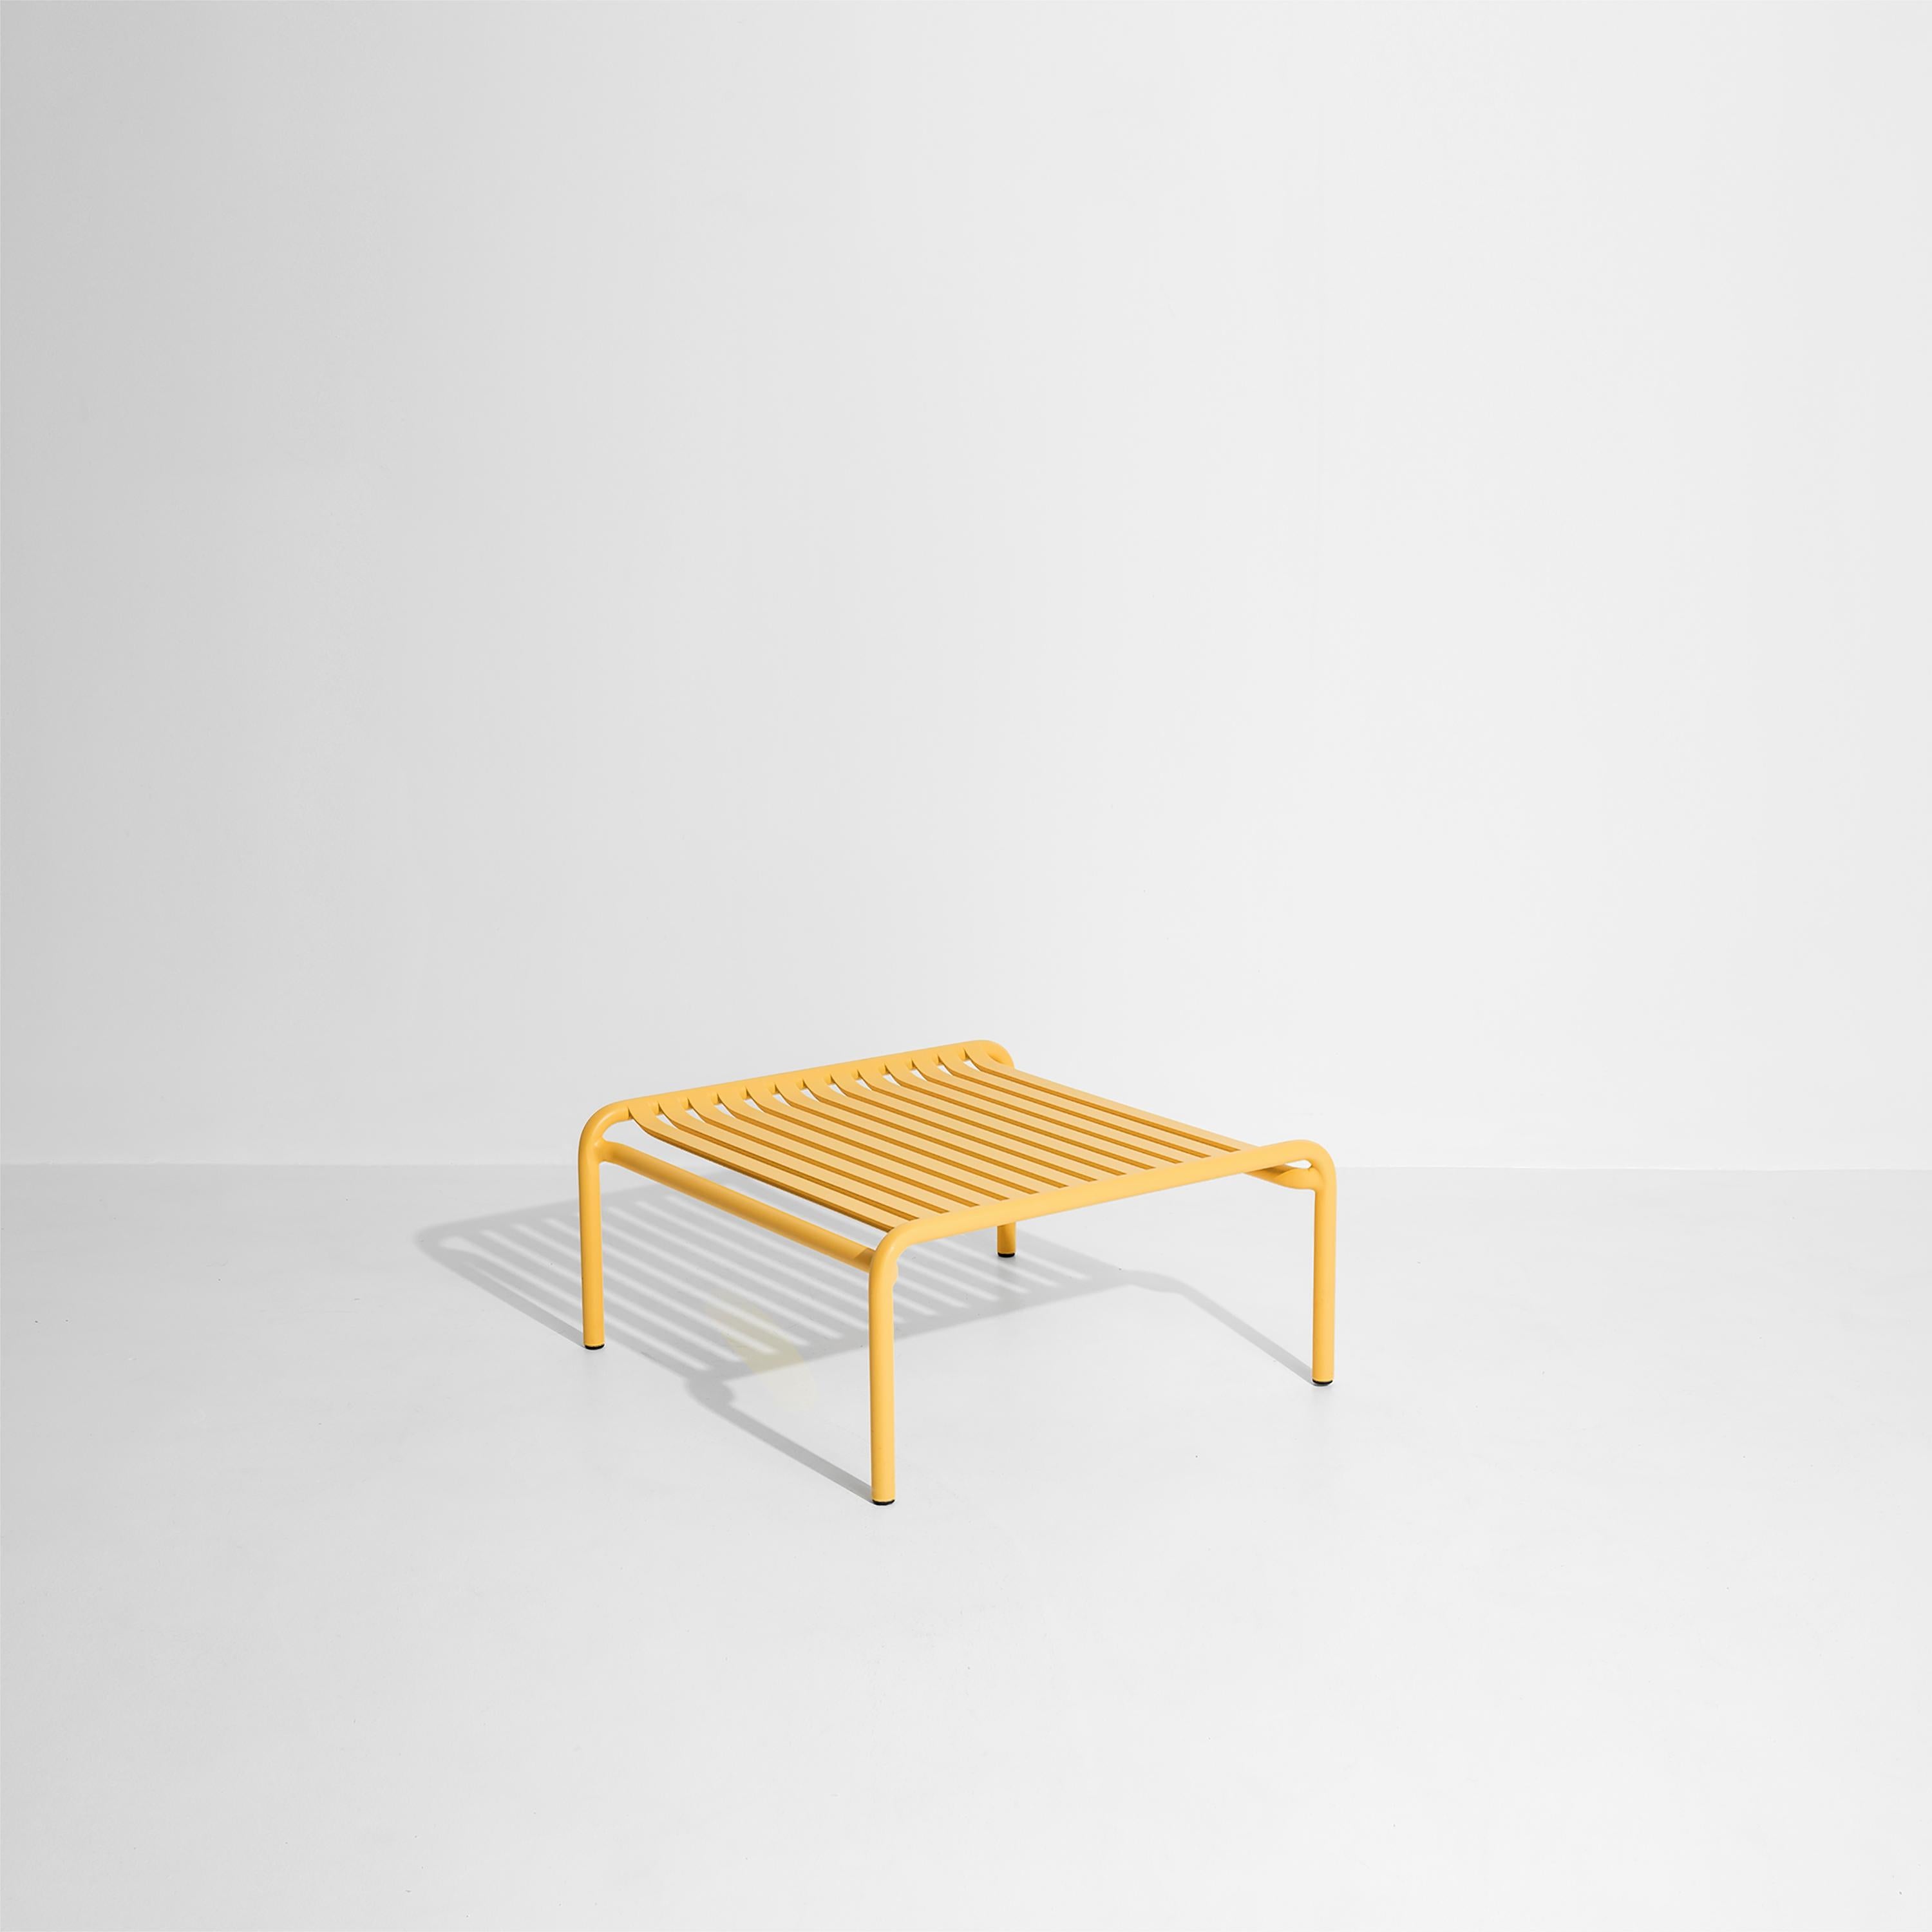 Petite Friture Week-End Coffee Table in Saffron Aluminium by Studio BrichetZiegler, 2017

The week-end collection is a full range of outdoor furniture, in aluminium grained epoxy paint, matt finish, that includes 18 functions and 8 colours for the